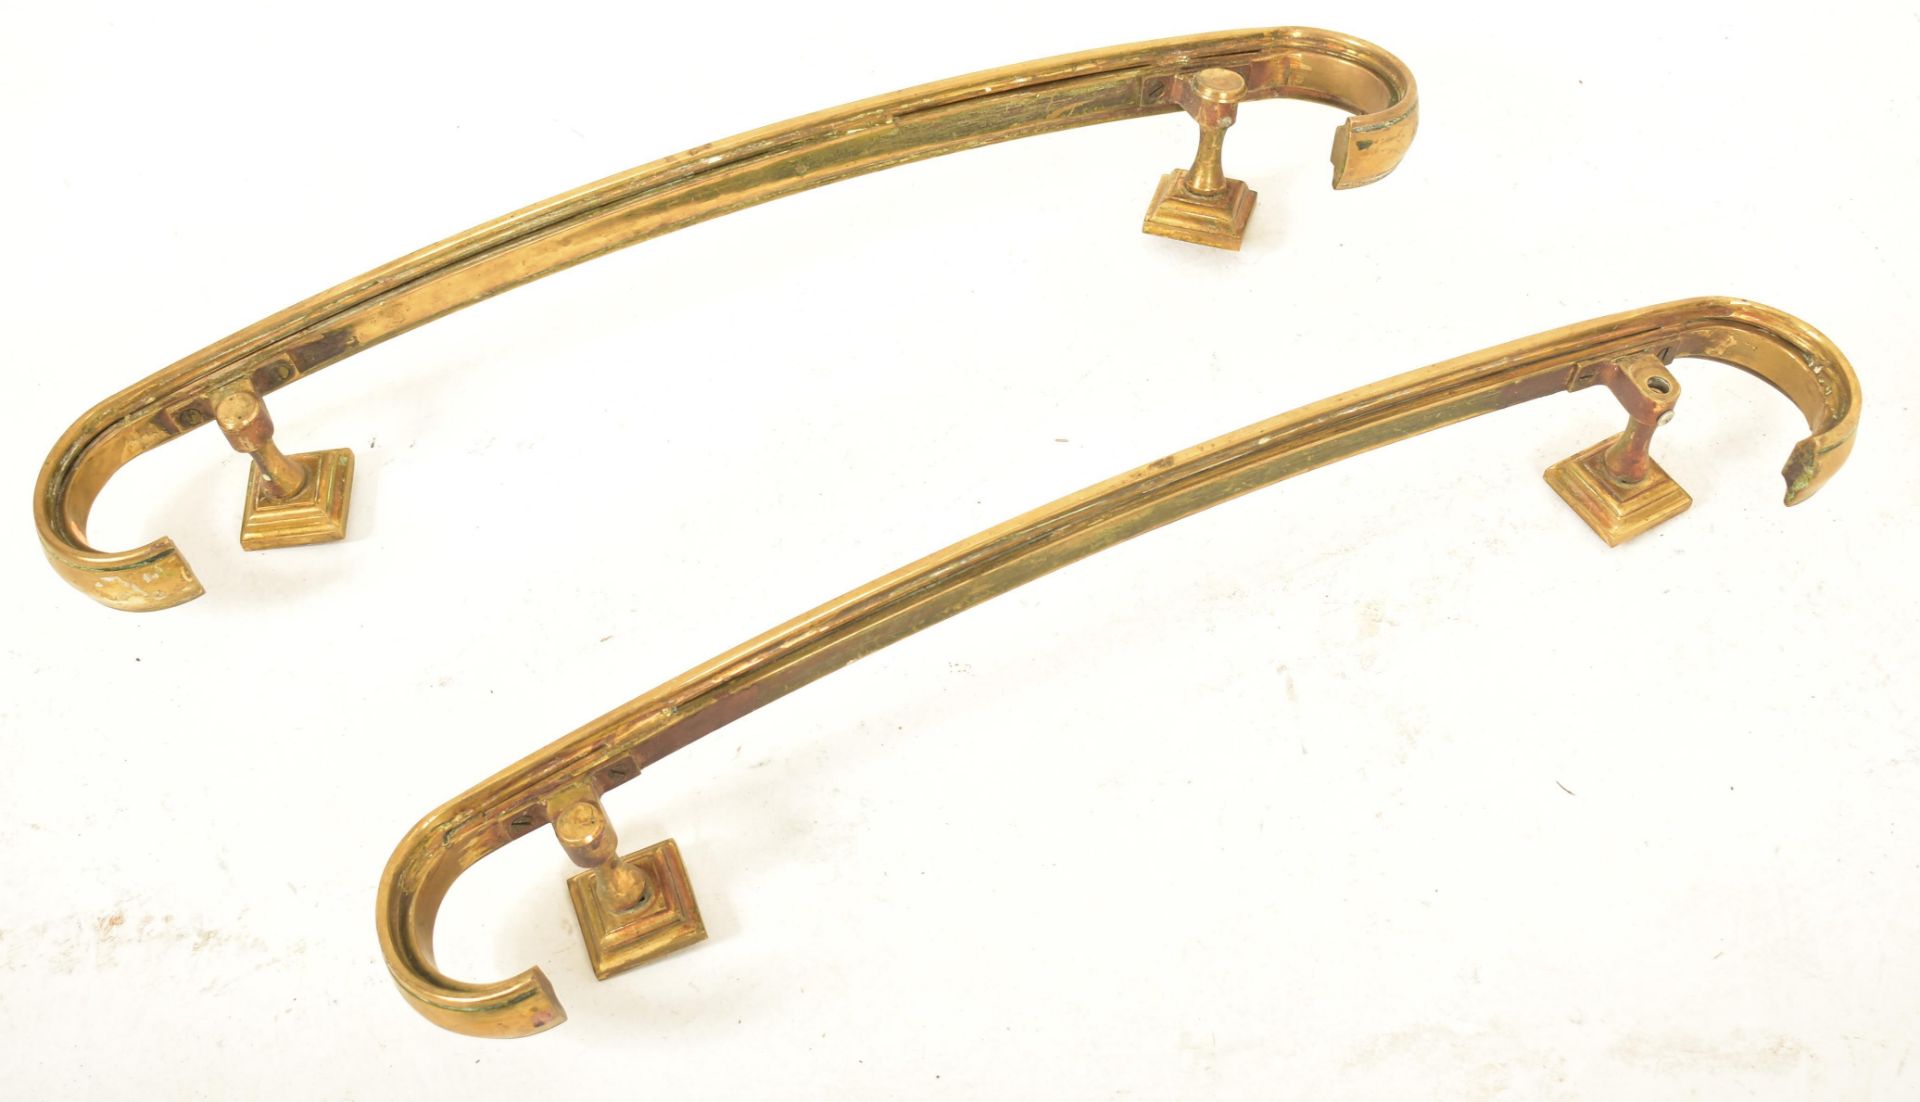 PAIR OF EARLY 20TH CENTURY BRASS THEATRE HANDRAILS - Image 2 of 6